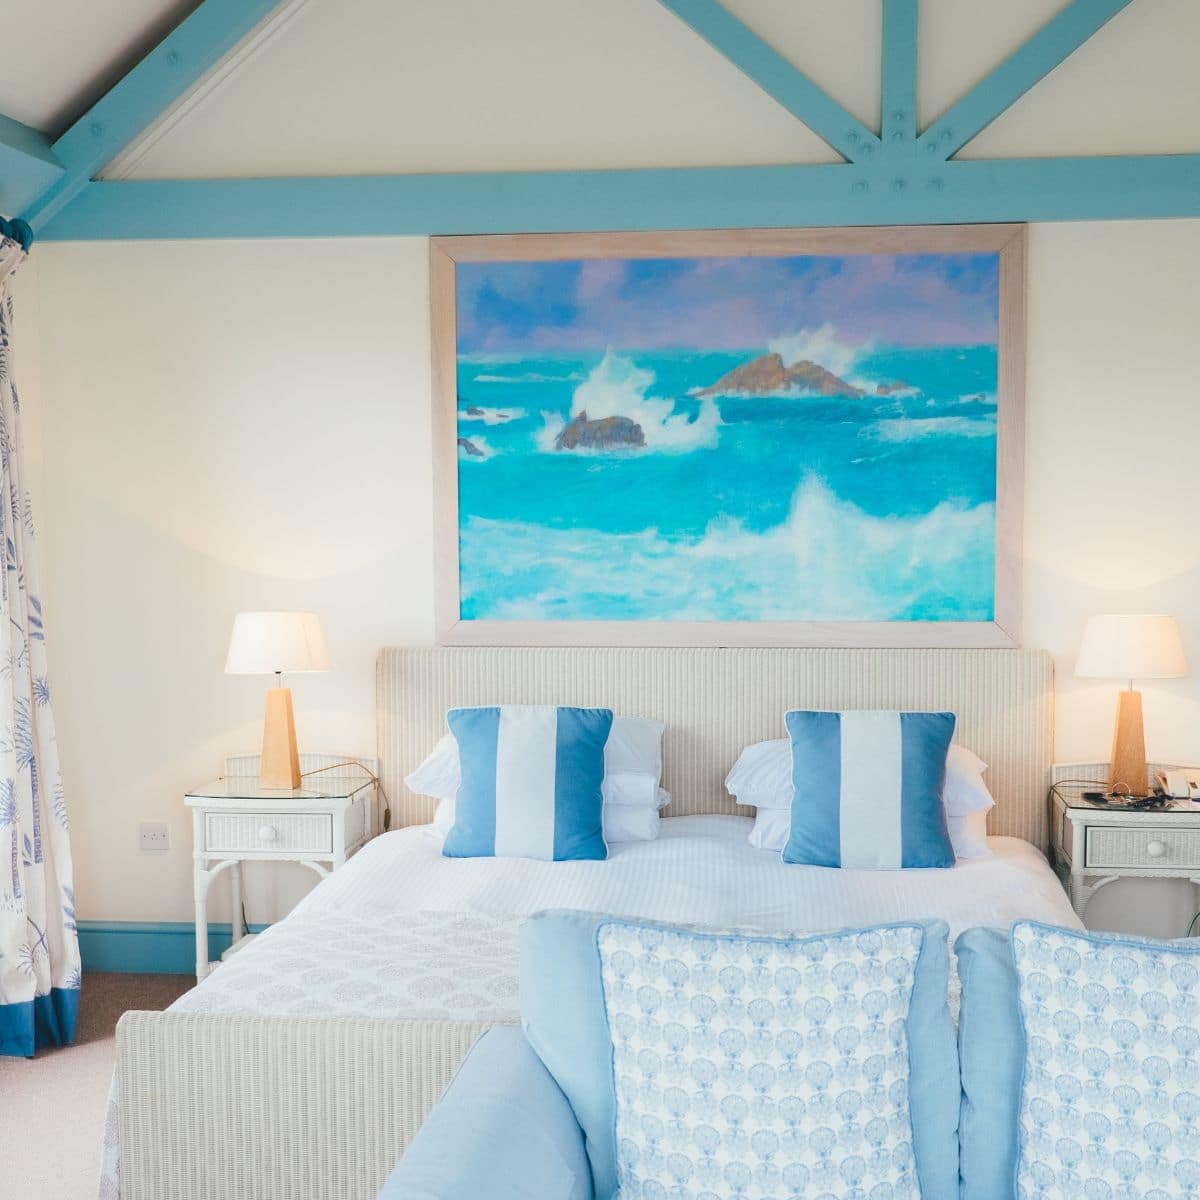 a white and blue bedroom with lamps on nightstands and a painting hanging over the bed